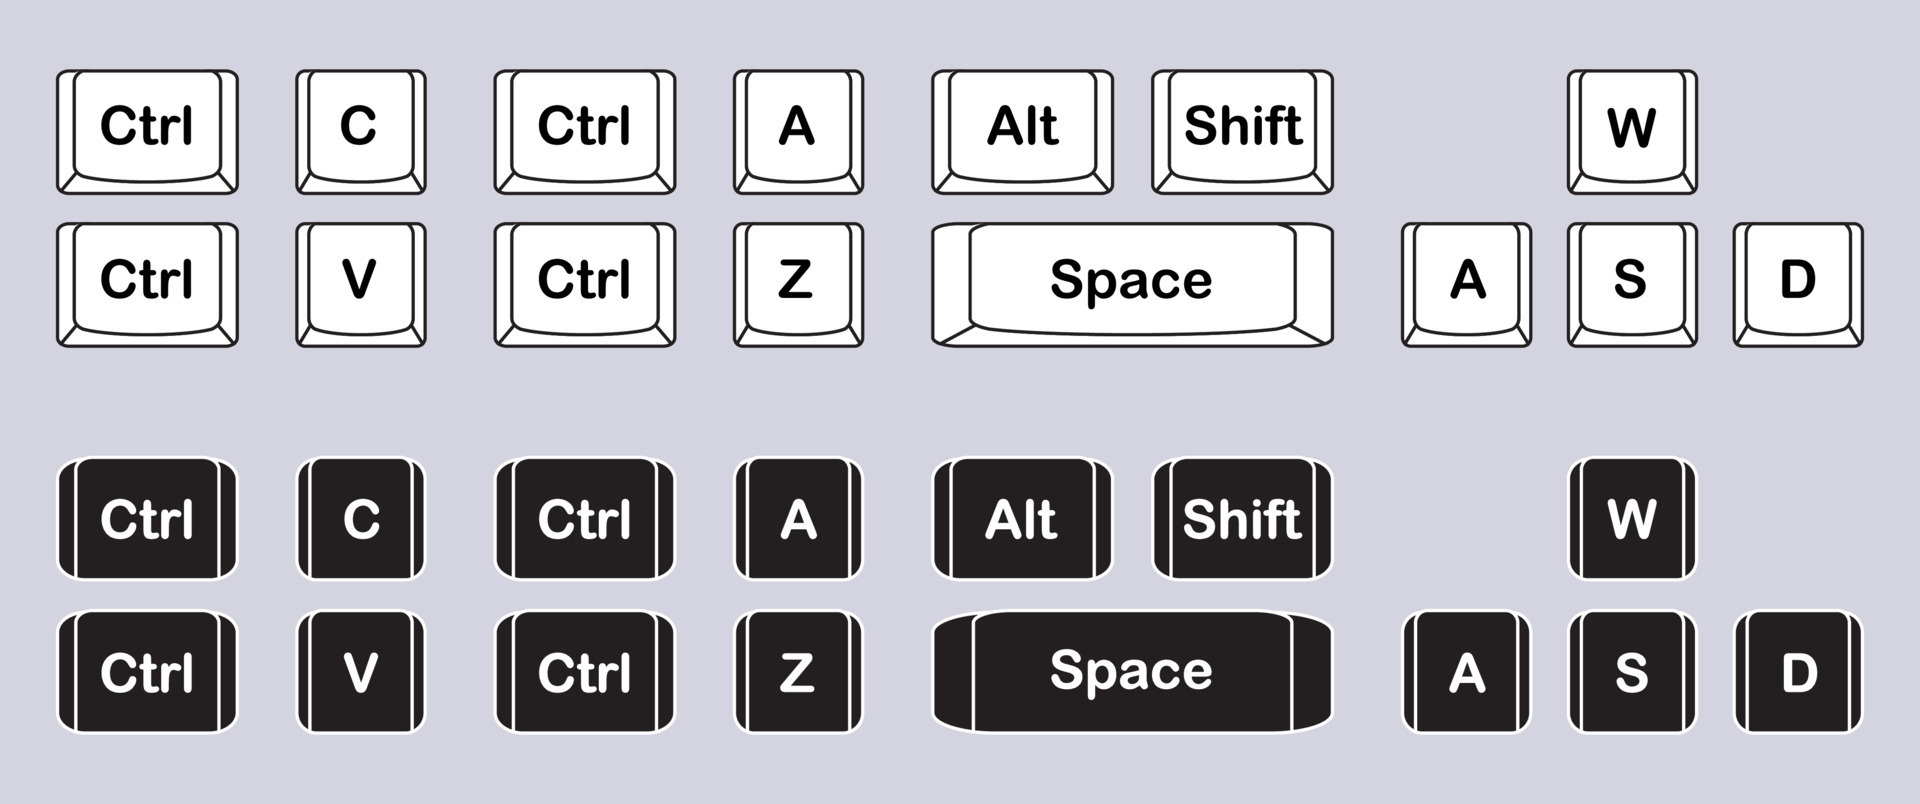 Command buttons. Space на клавиатуре. Кнопка Set. Keyboard Key icon. Hold Space на клавиатуре.